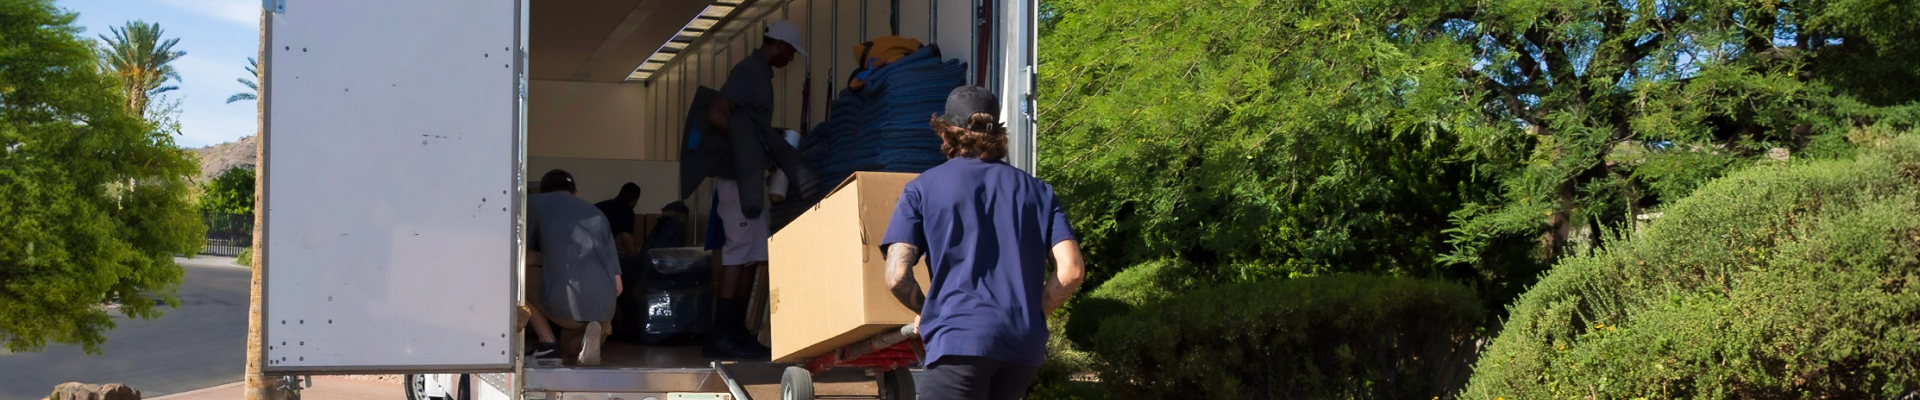 Moving Boxes & Supplies in Phoenix AZ - Just-in Time Moving and Storage